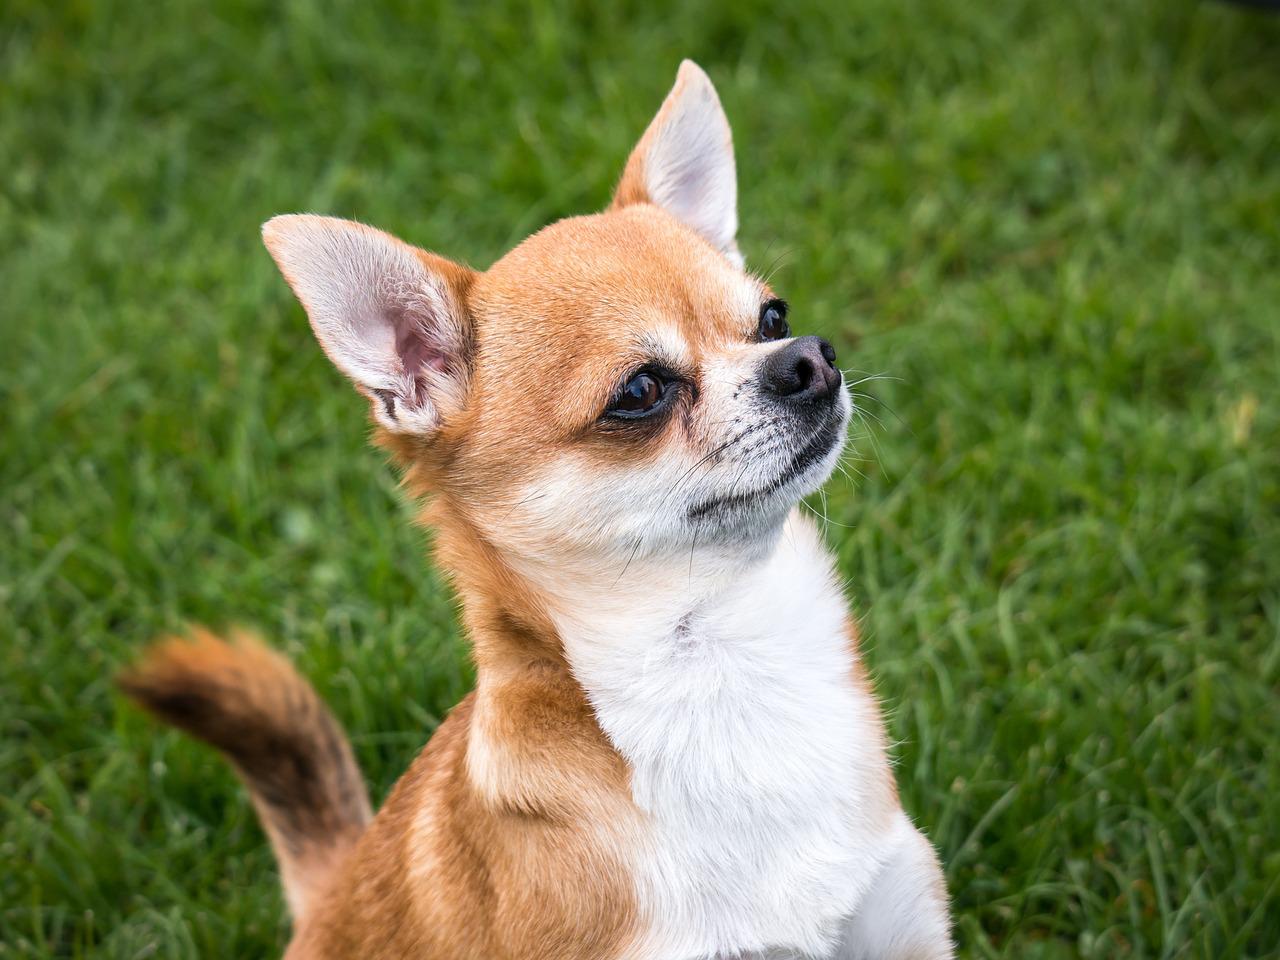 Factors That Affect How Long a Chihuahua Can Hold Its Bladder